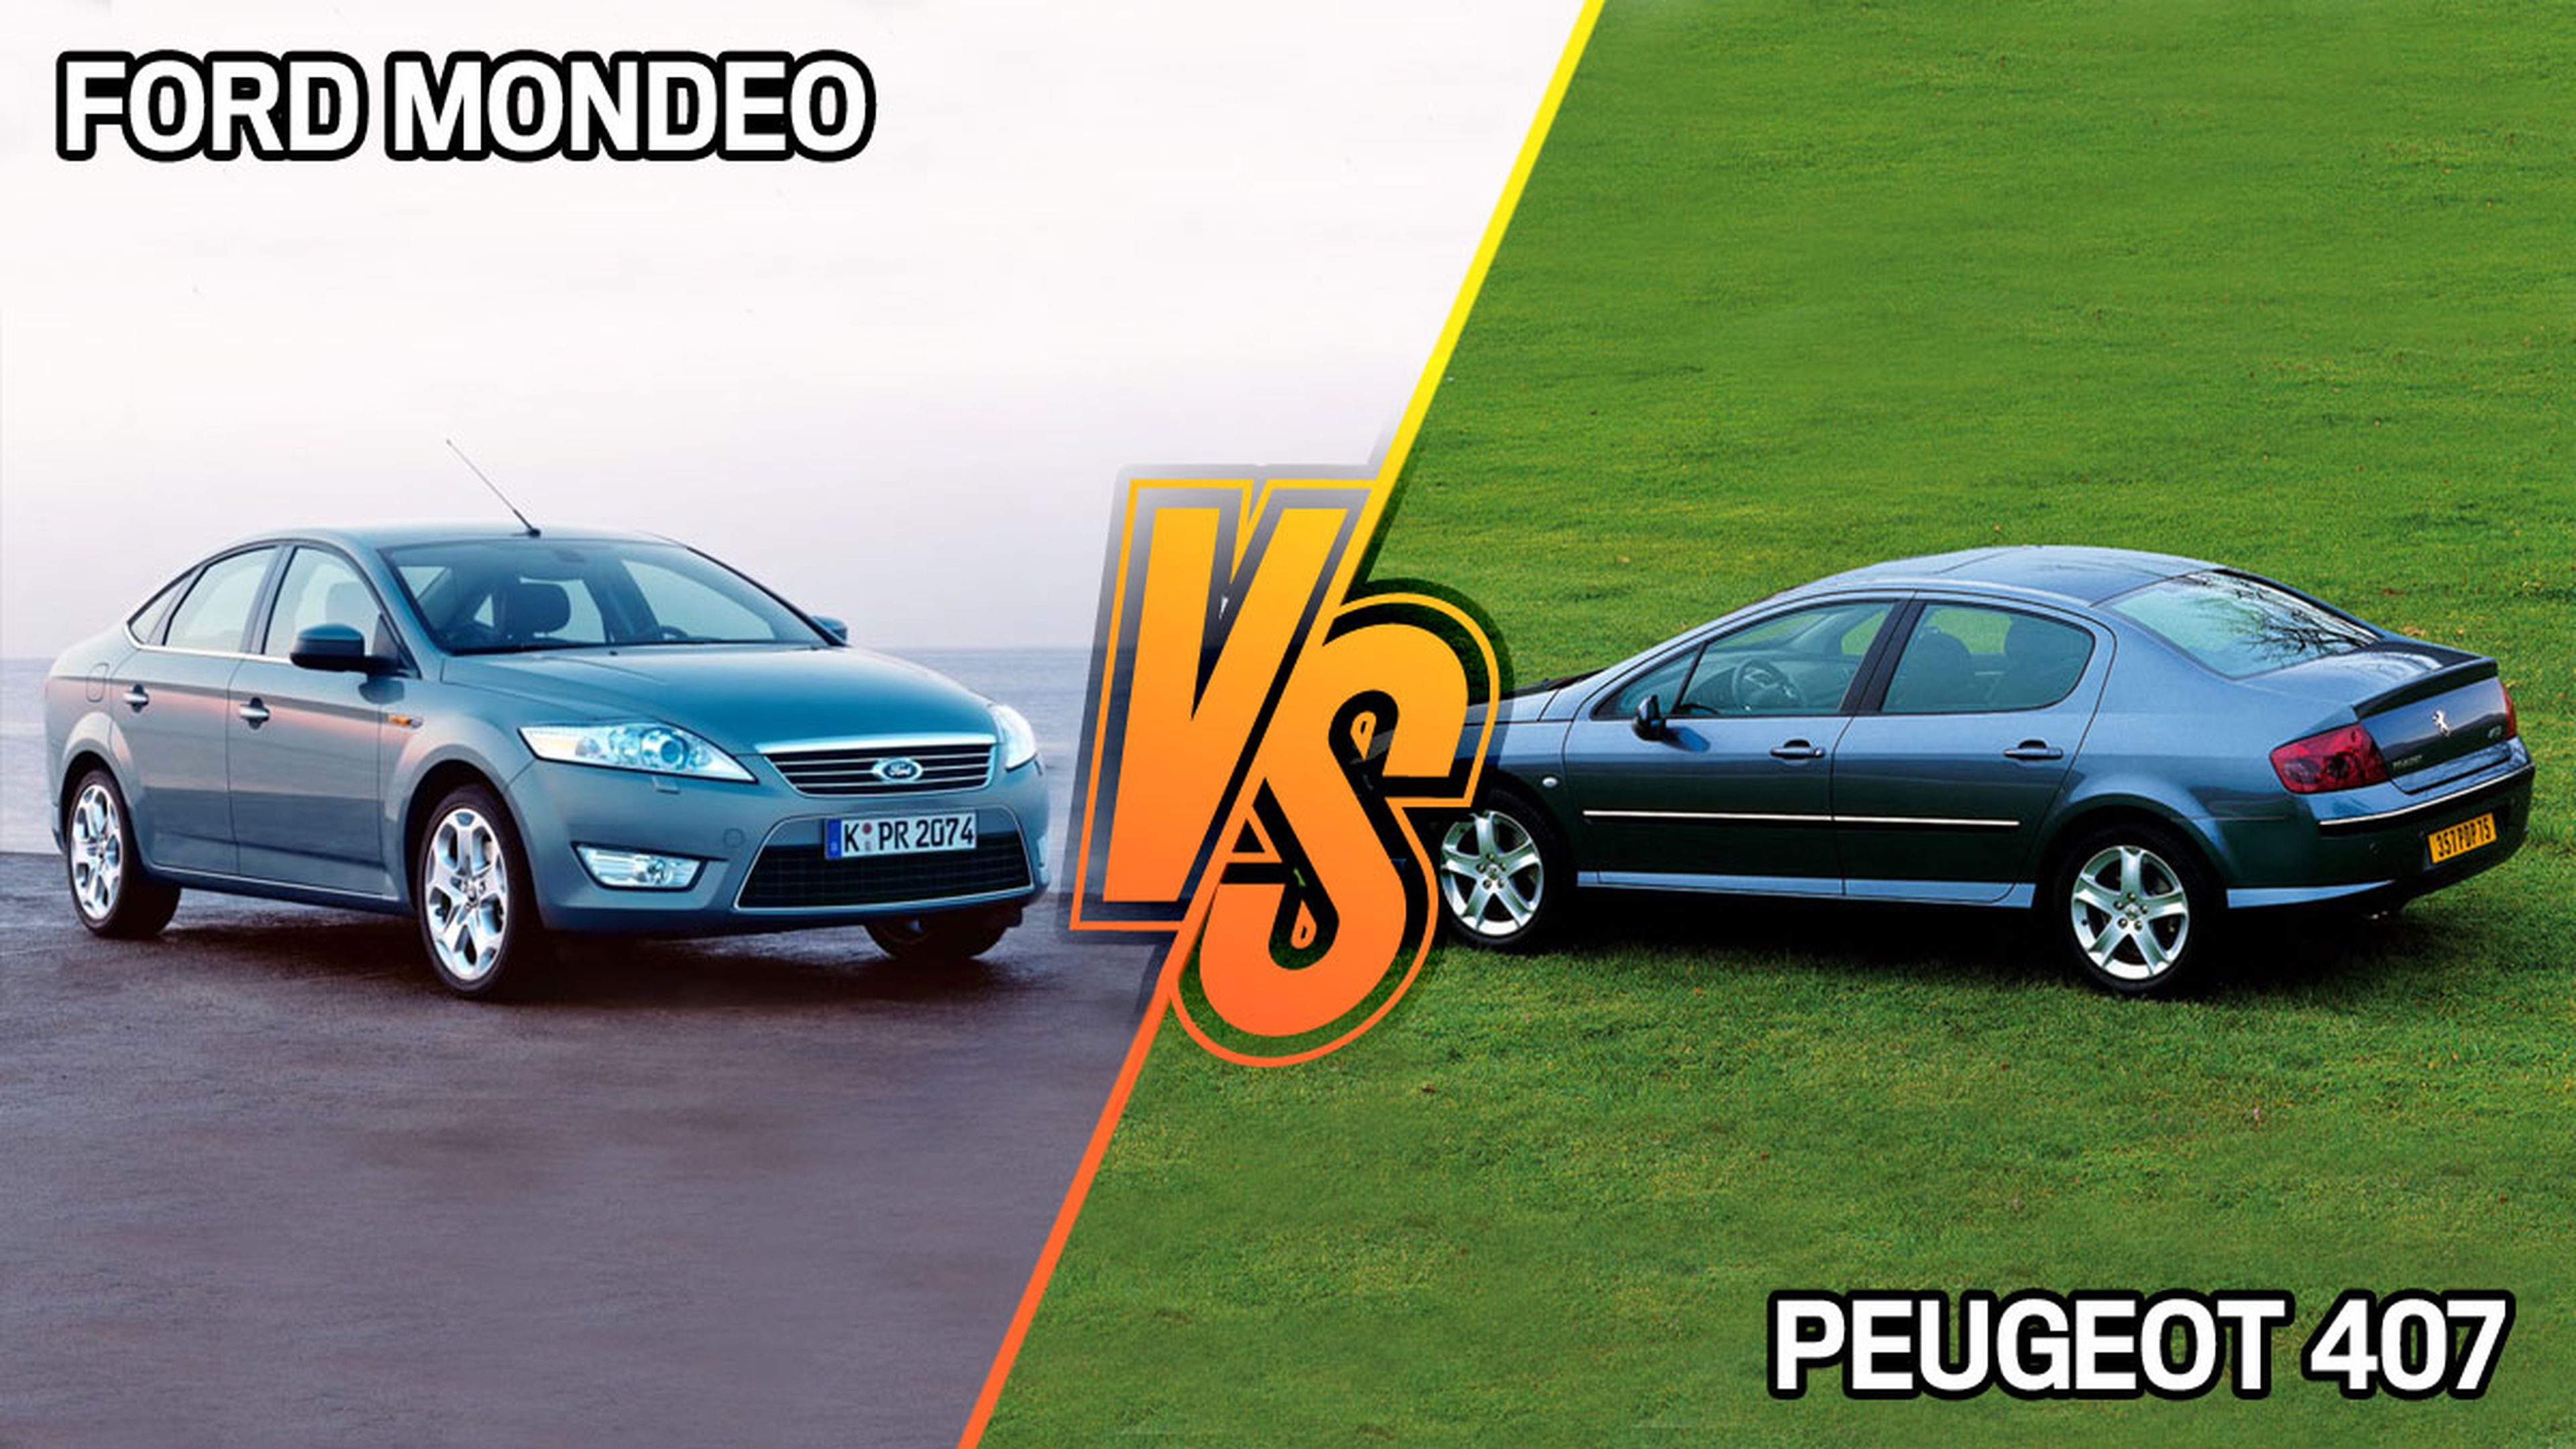 Ford Mondeo y Peugeot 407